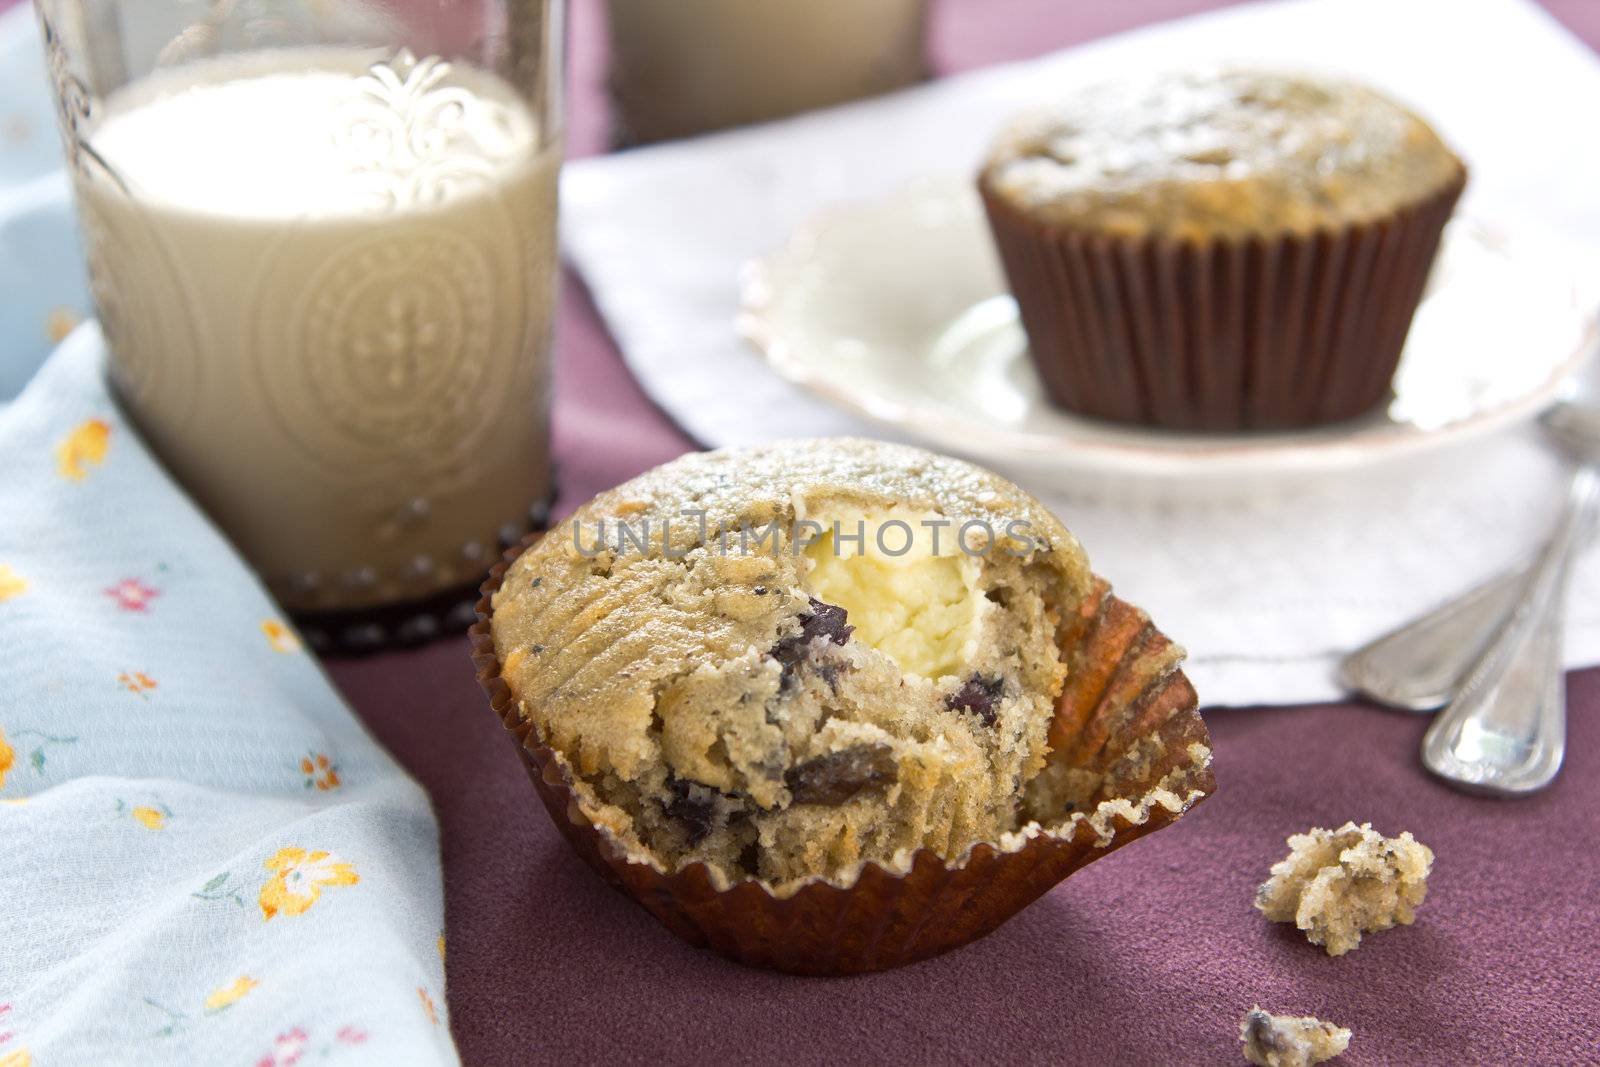 Blueberry with cream cheese muffin